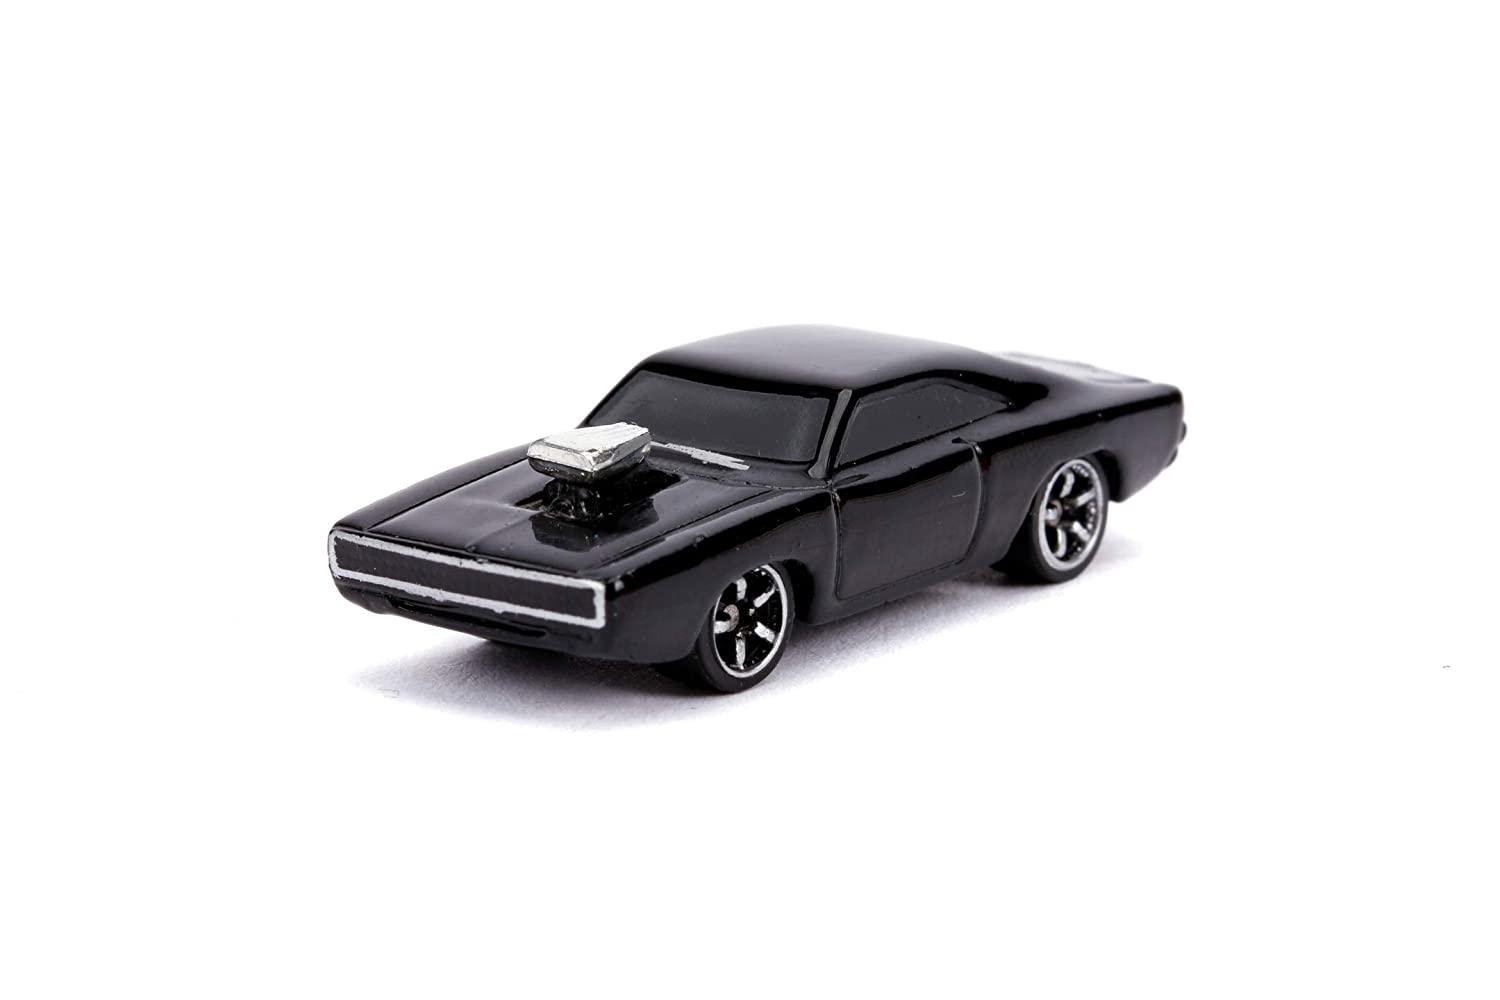 Jada NV-1 Fast & Furious - 3 Pack Diecast Cars - Dodge Charger, Mitsubishi Eclipse and Ford F-150 Car